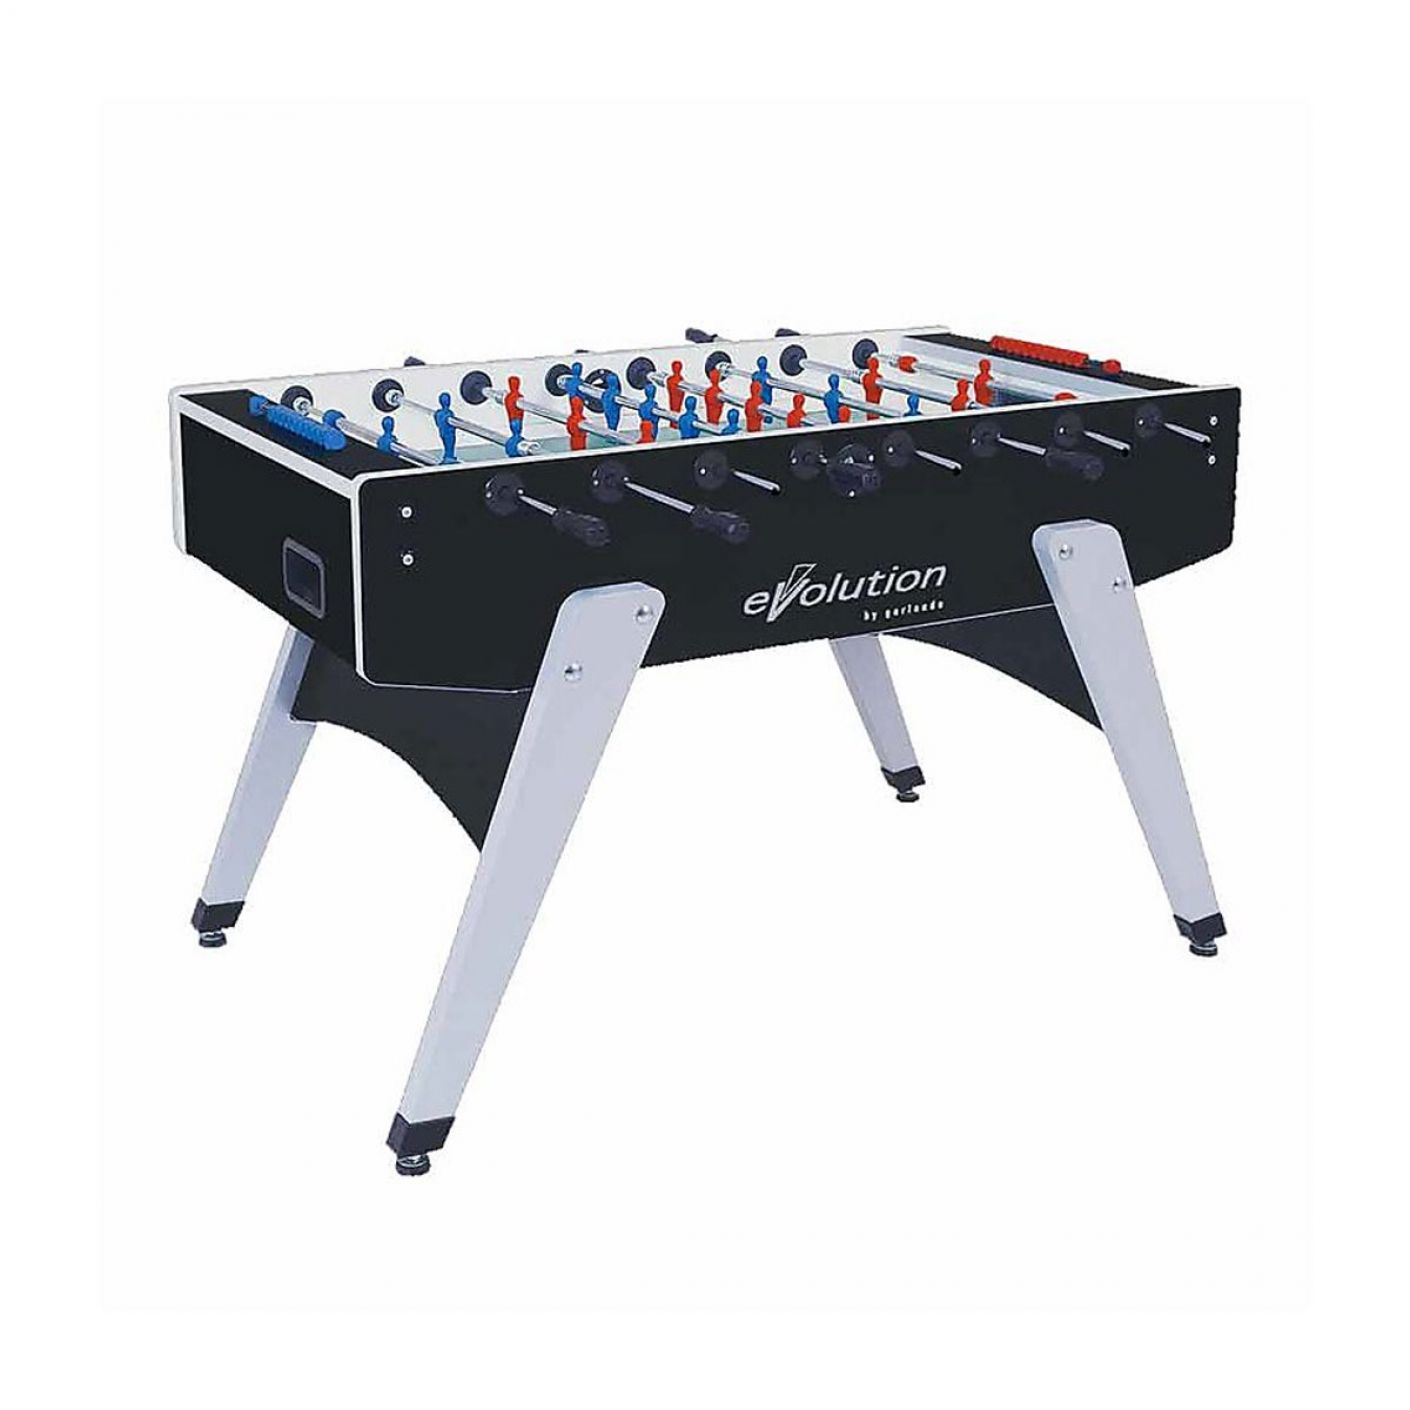 Garlando Table Football G-2000 EVOLUTION with outgoing rods